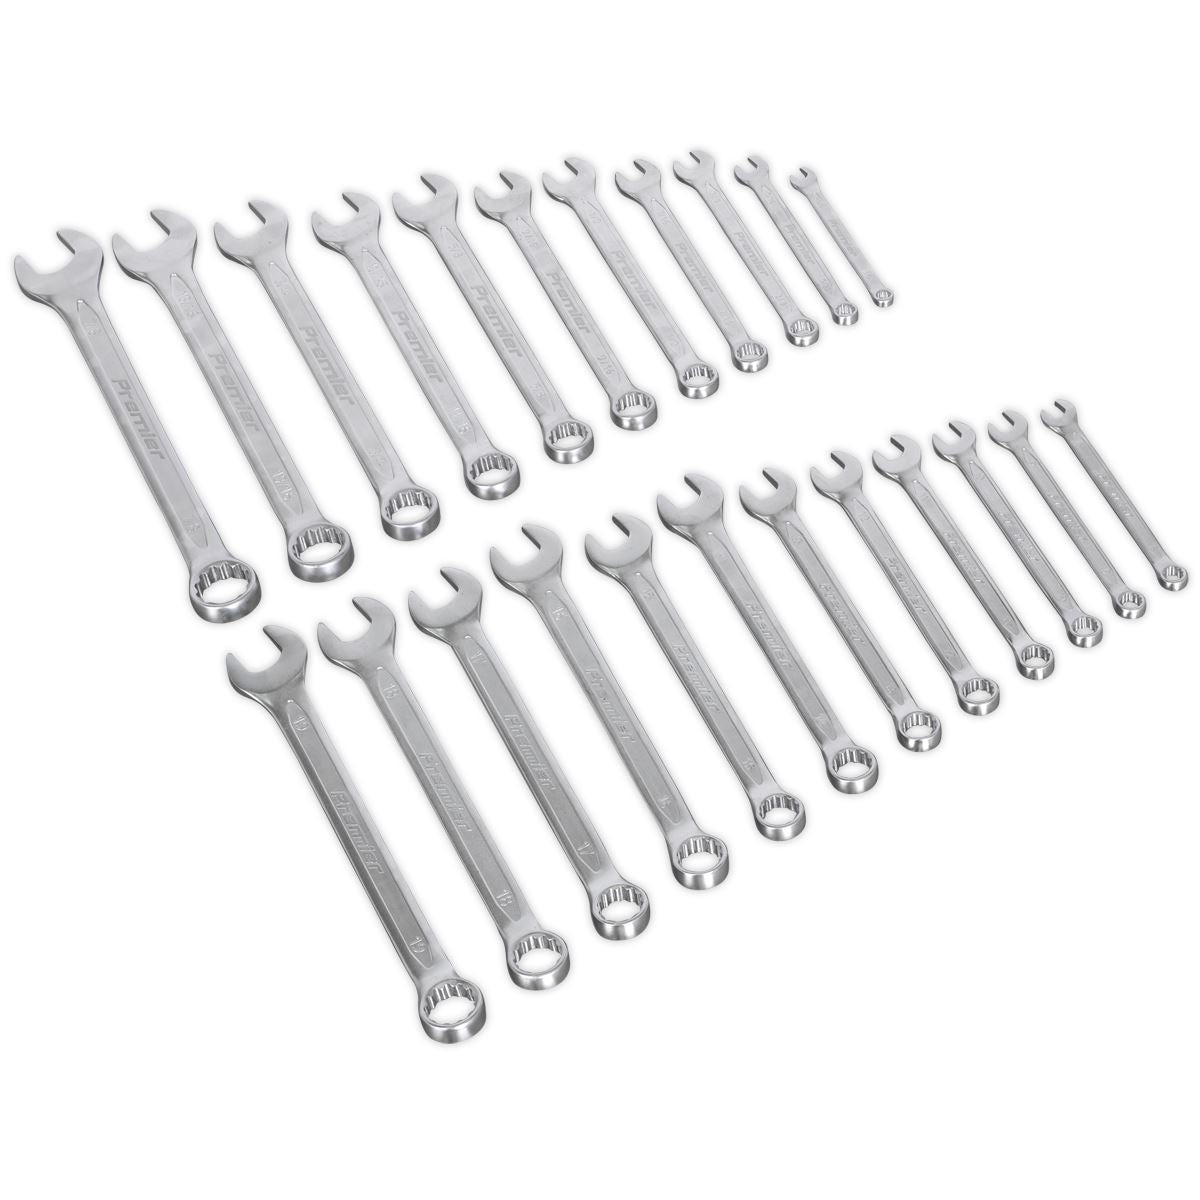 Sealey Premier 23 Piece Cold Stamped Combination Spanner Set Metric/Imperial